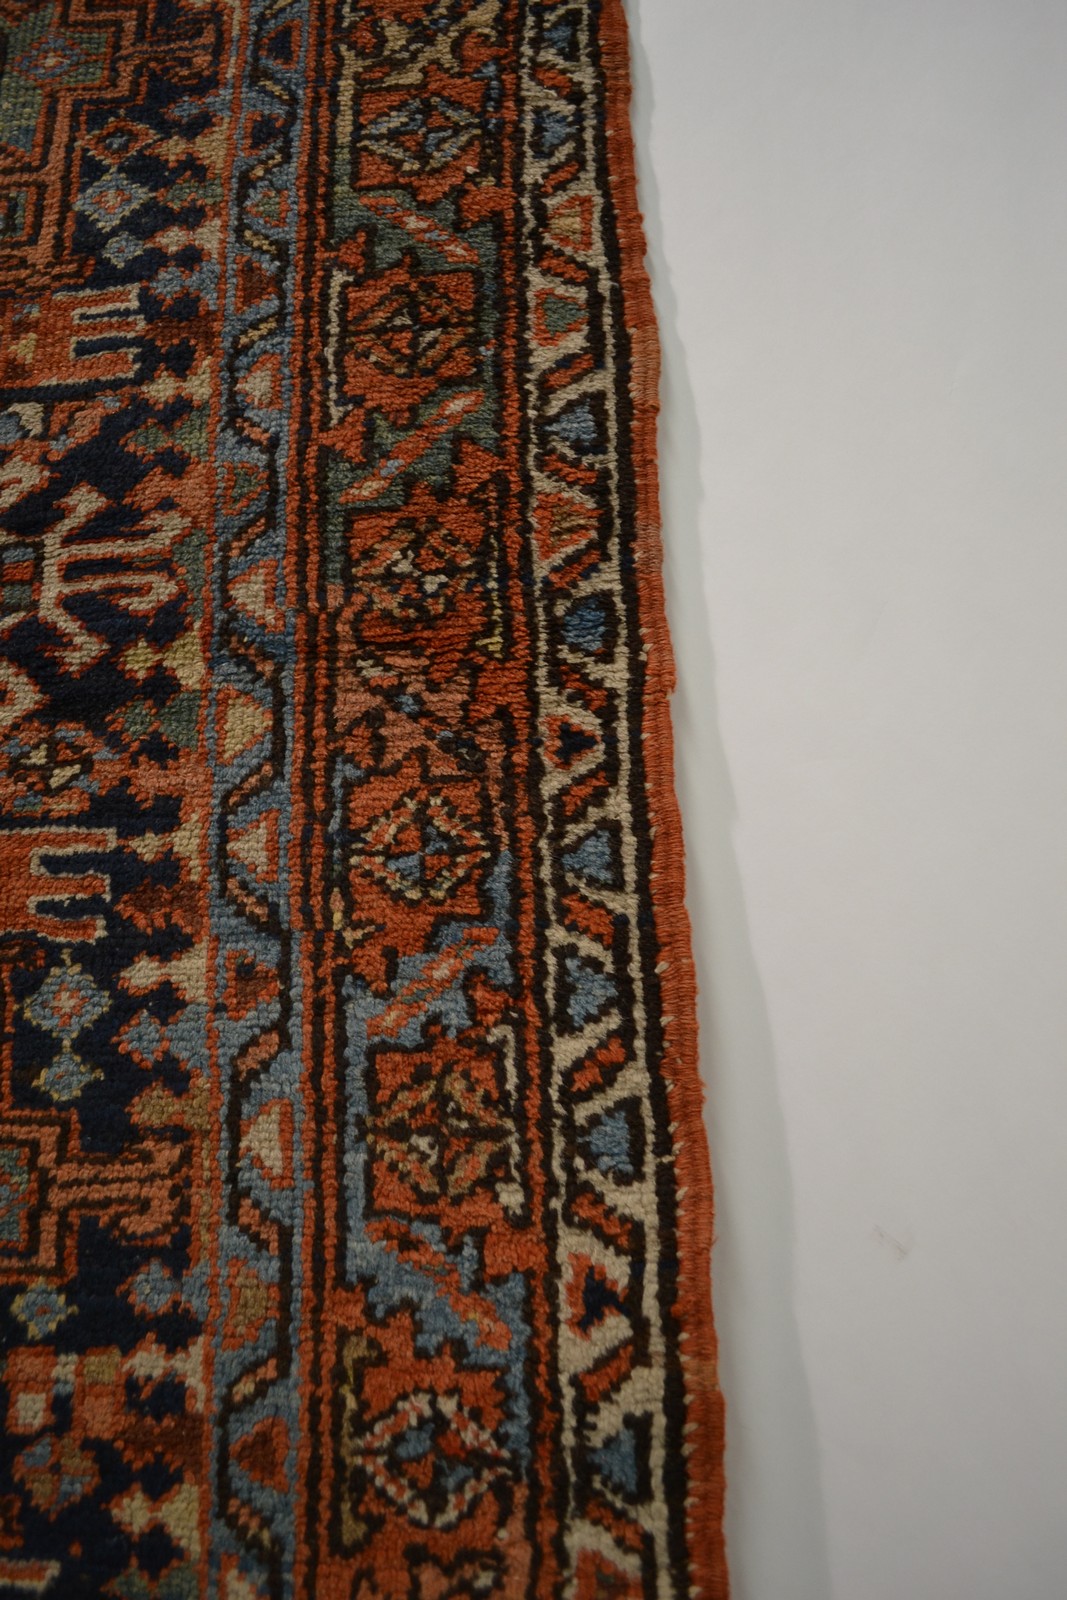 Karaja rug, north west Persia, about 1920s, 4ft. 4in. x 3ft. 1in. 1.32m. x 0.94m. Slight loss to top - Image 5 of 7